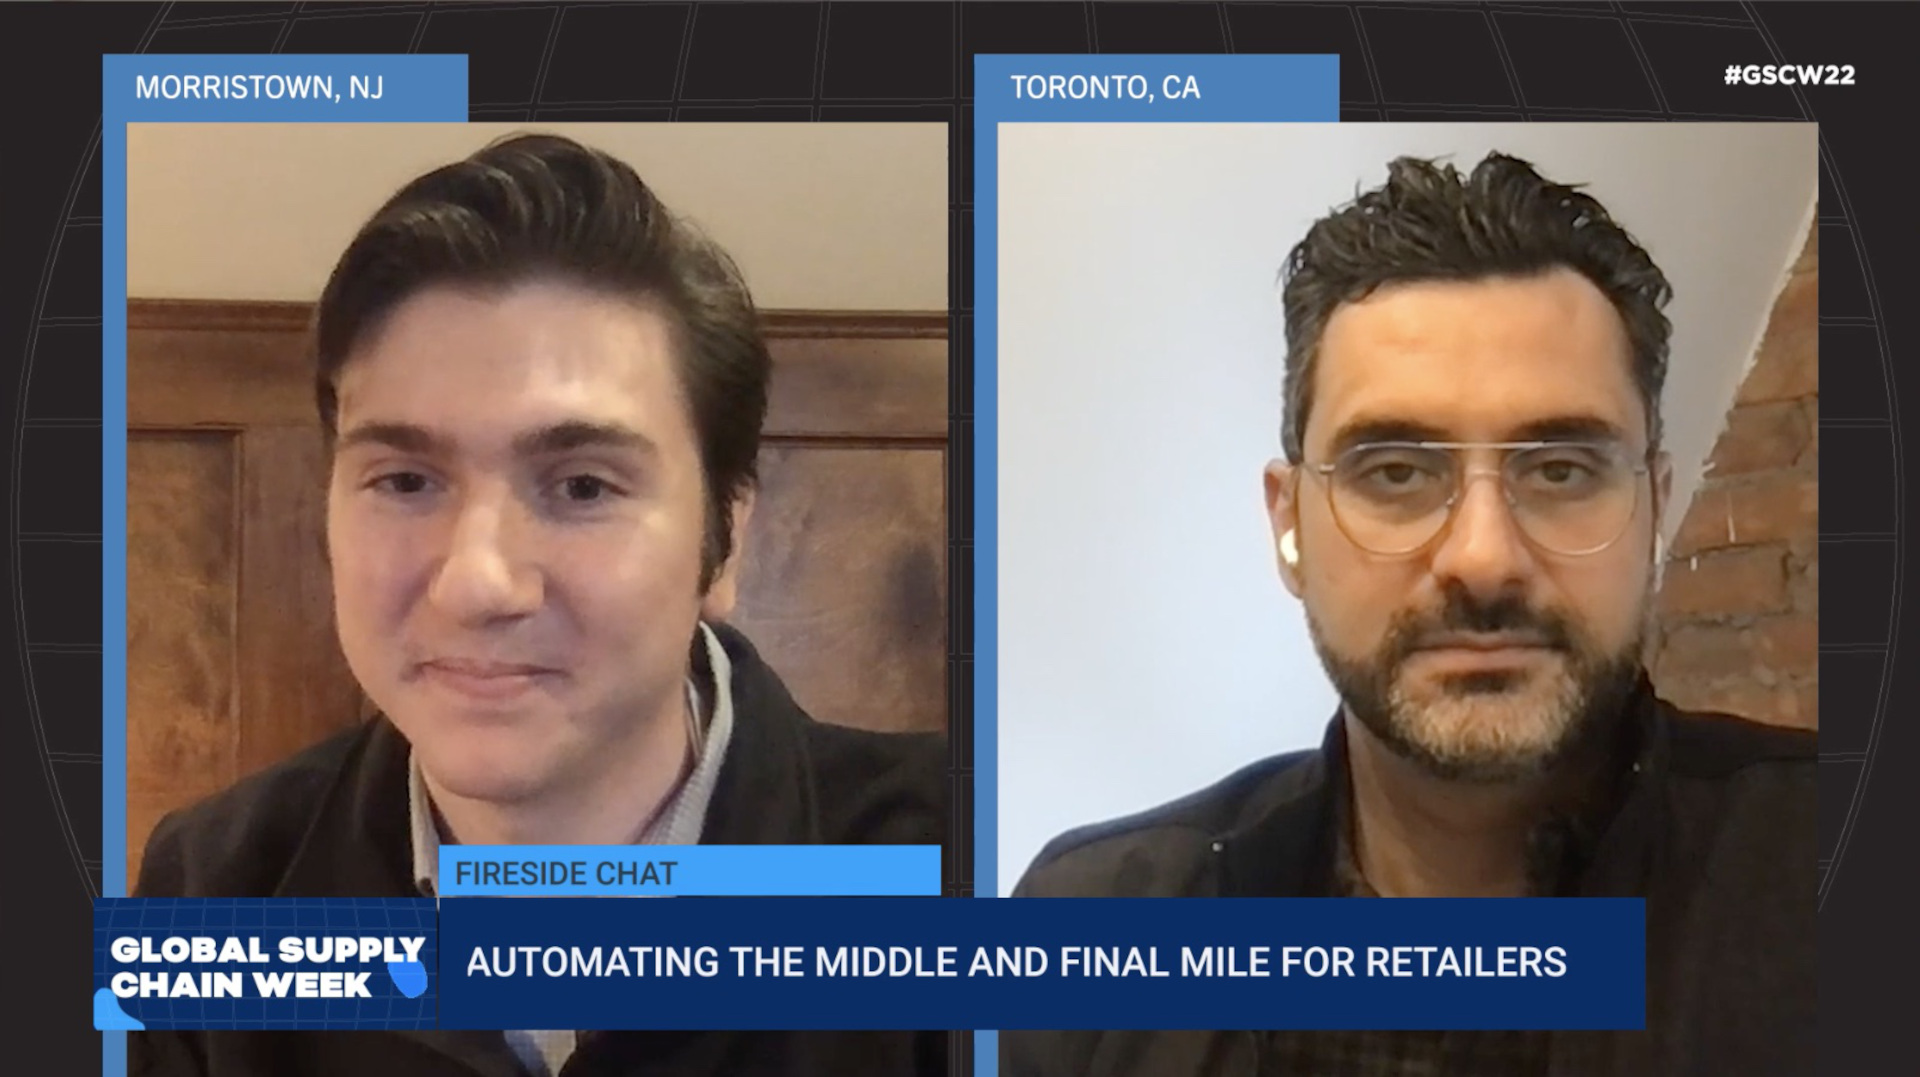 GSCW chat: last and middle mile automation for retail supply chains